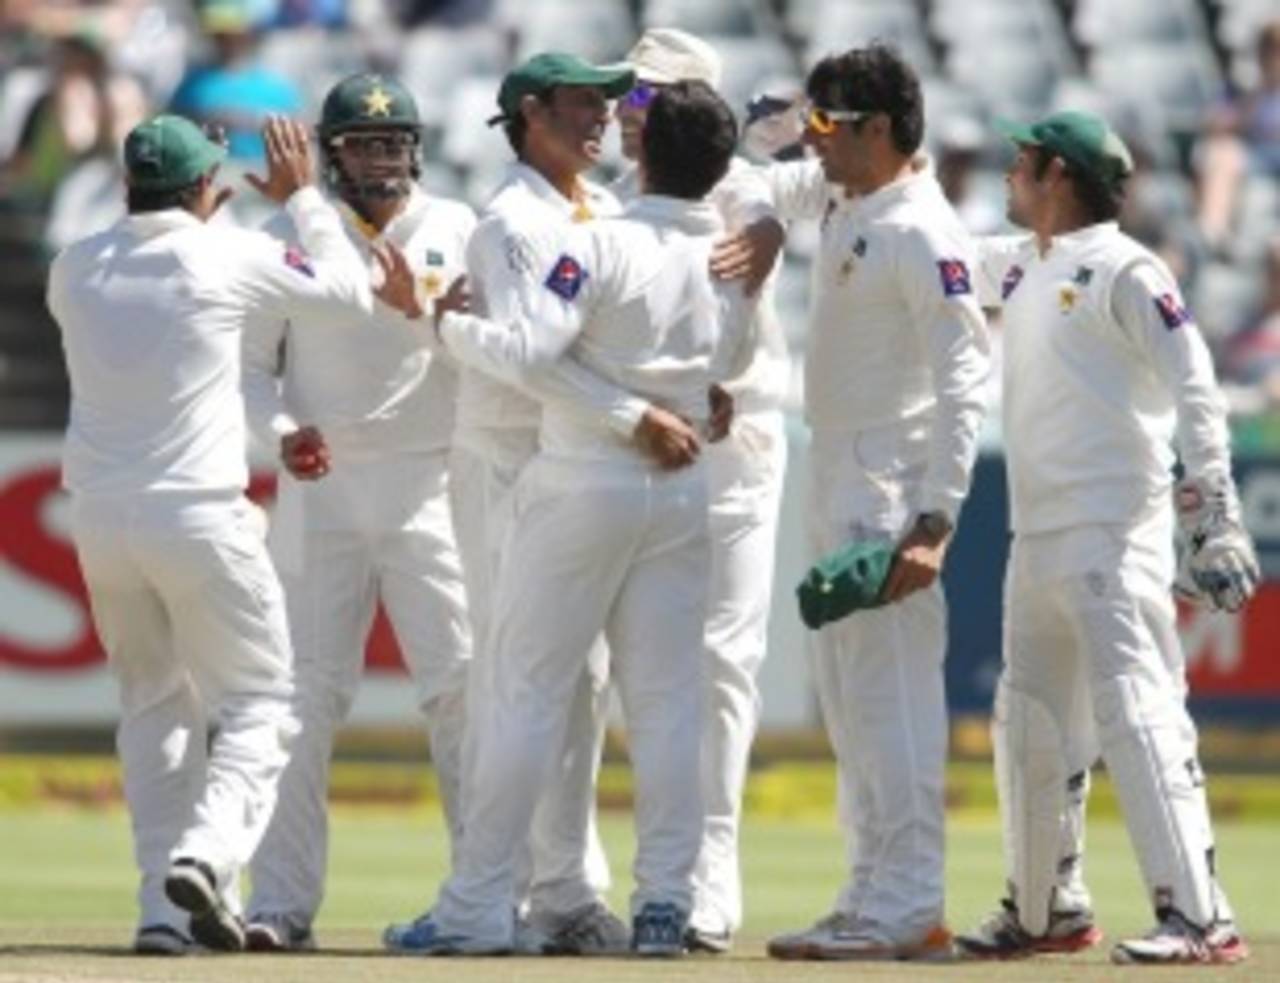 Saeed Ajmal is congratulated by his team-mates, South Africa v Pakistan, 2nd Test, Cape Town, 2nd day, February 15, 2013